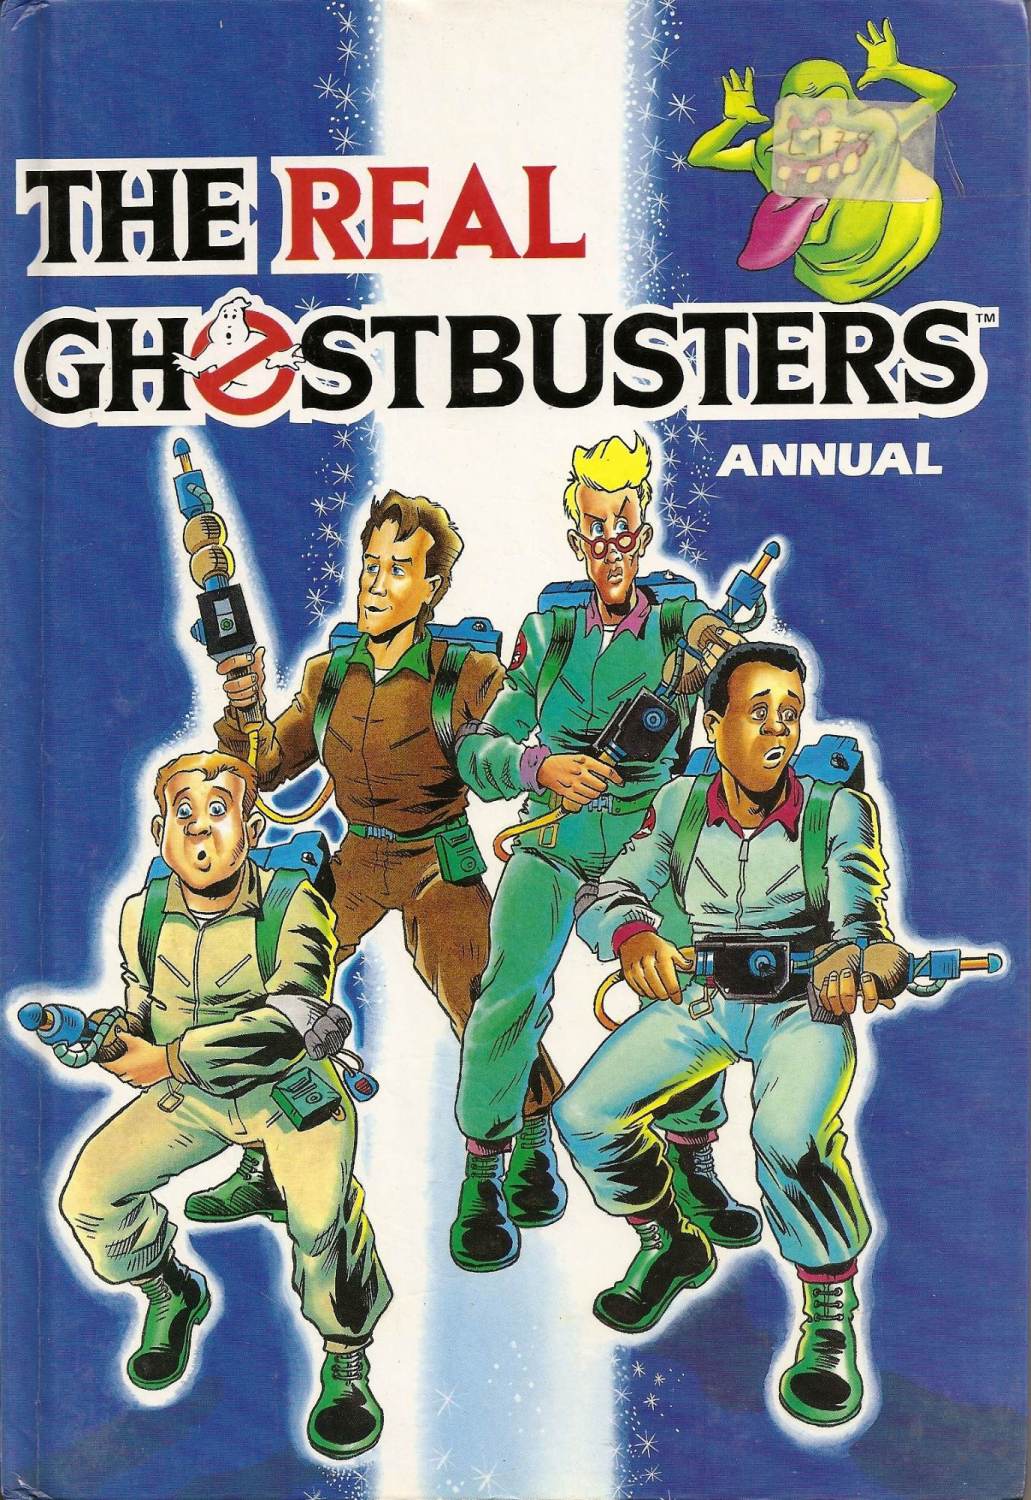 -- The Real Ghostbusters Annual - 1989